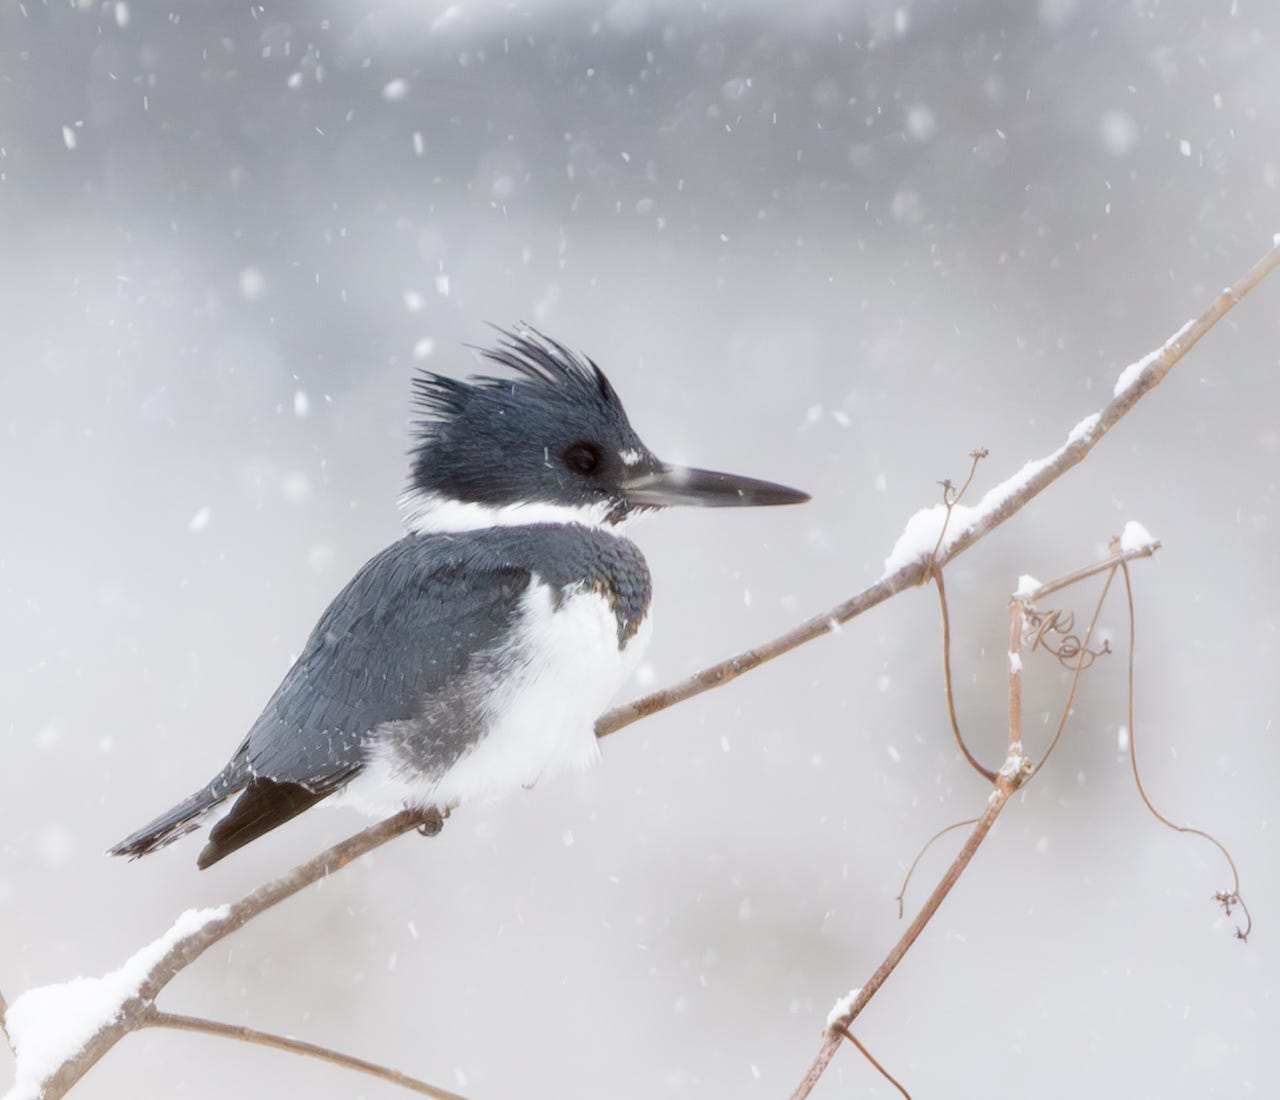 A male kingfisher sits on a snowy branch, puffed up against the falling snow